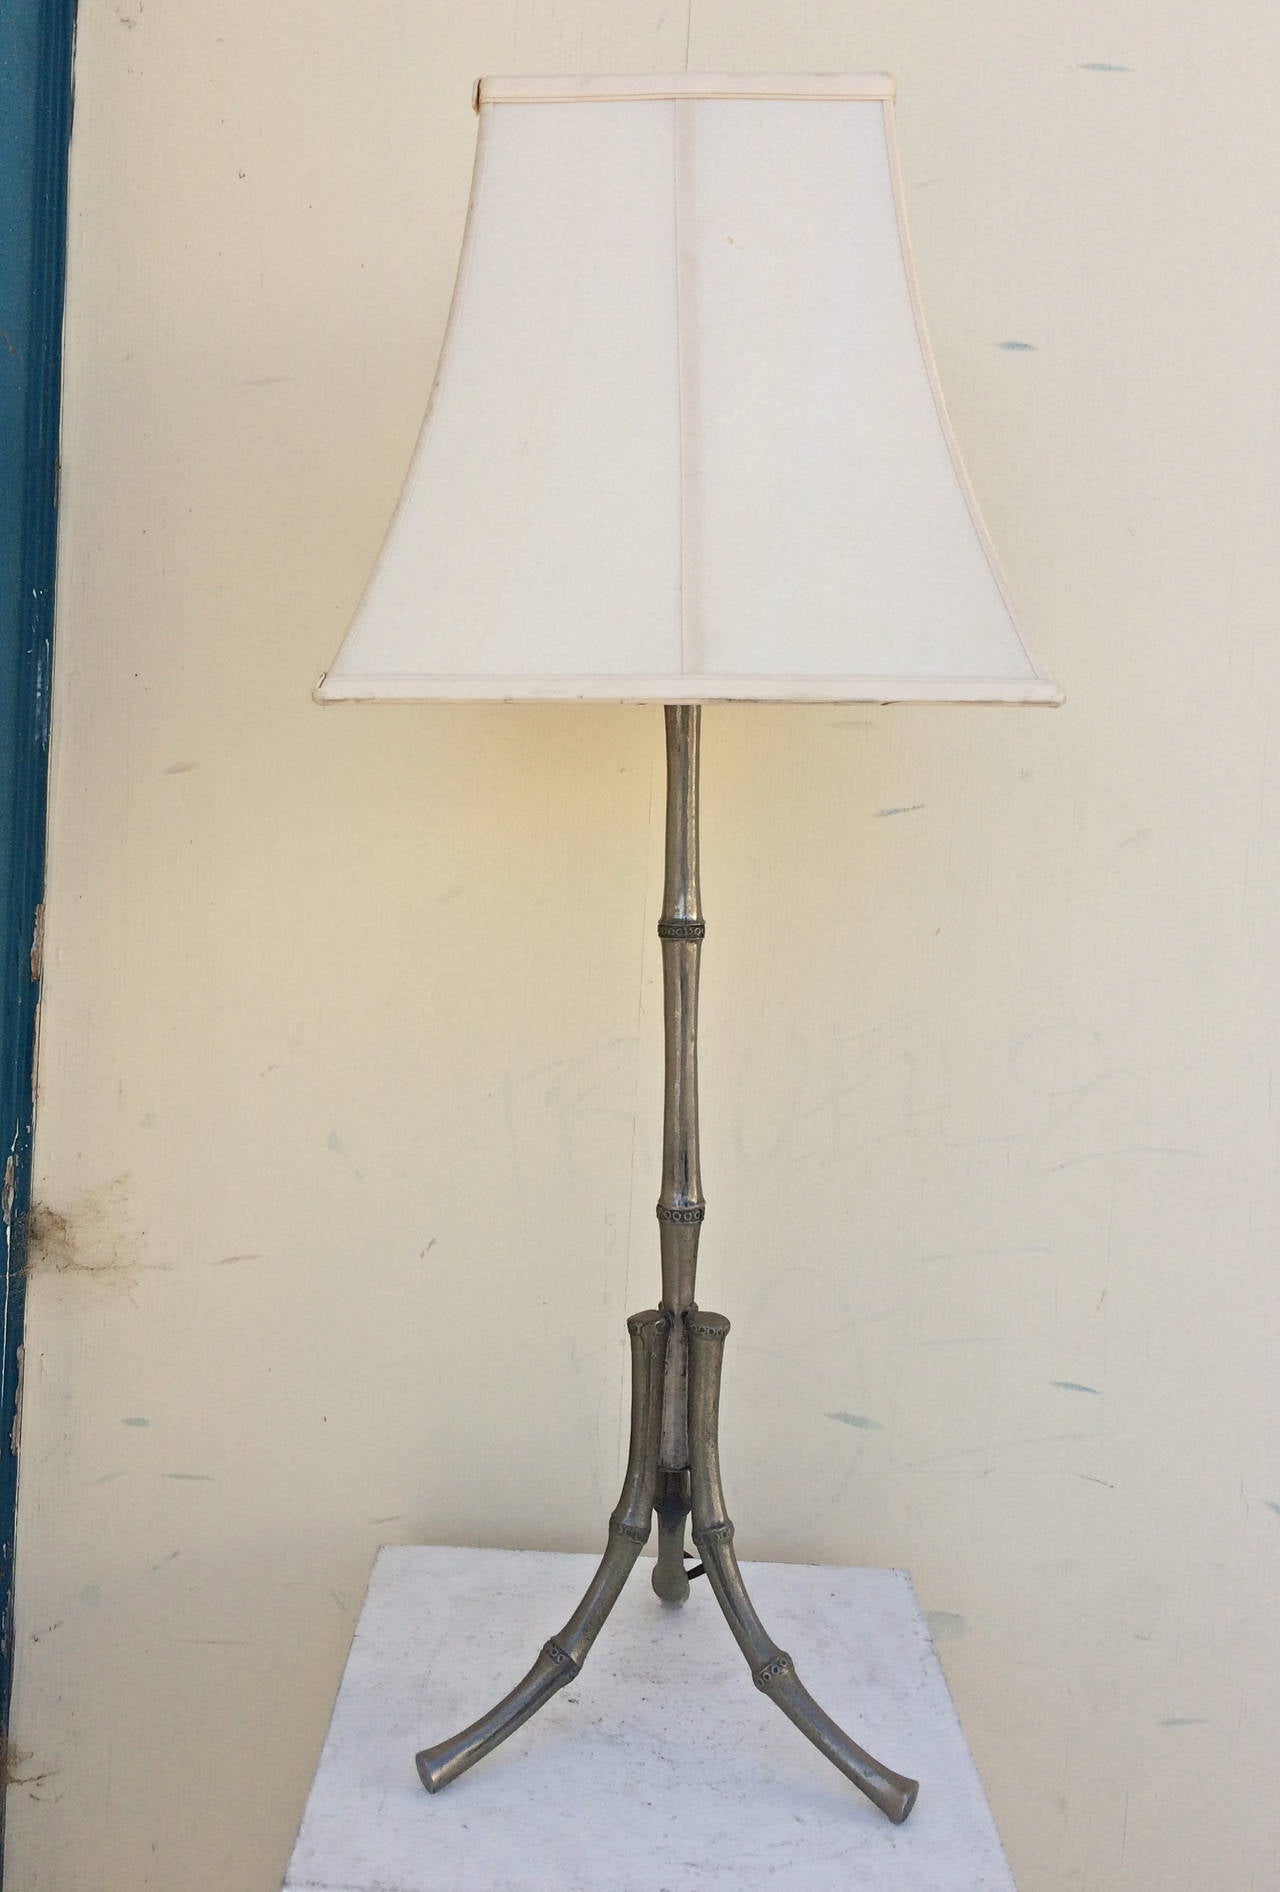 Hollywood Regency Faux Bamboo Table Lamp
circa 1960
nickel-plated iron
32 inches high with shade